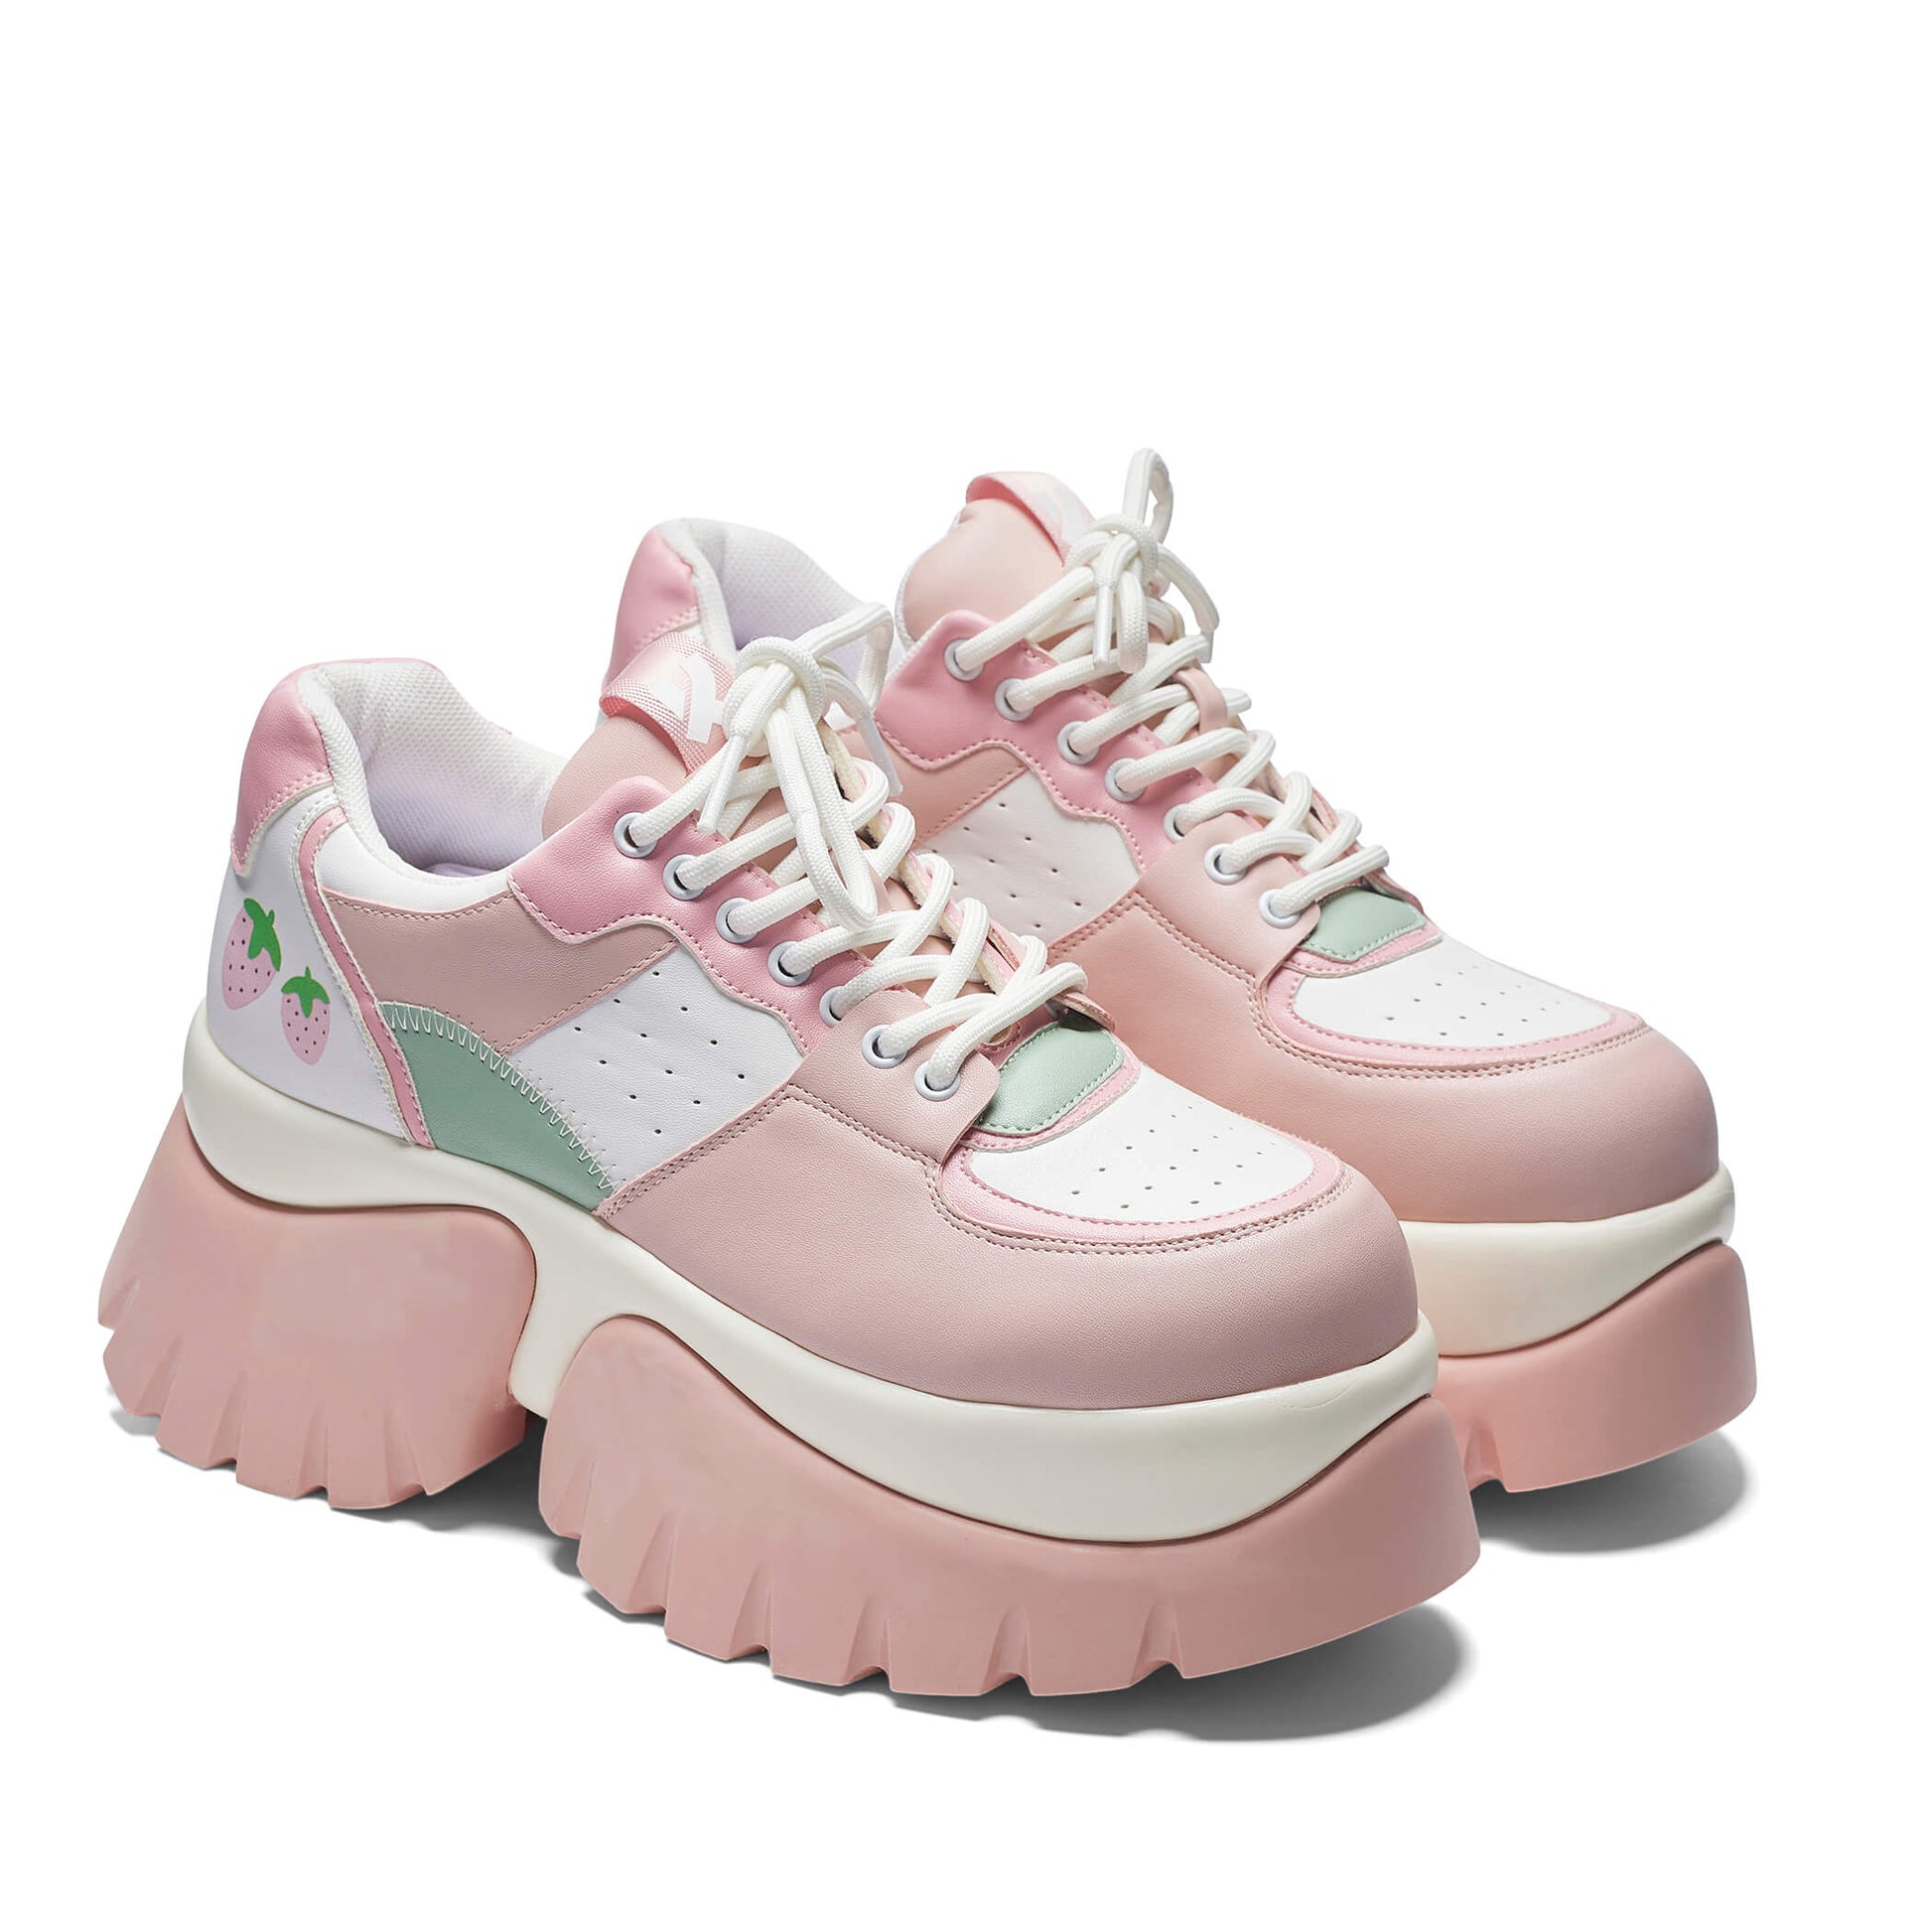 Strawberry Juice Trainers - Trainers - KOI Footwear - Pink - Three-Quarter View